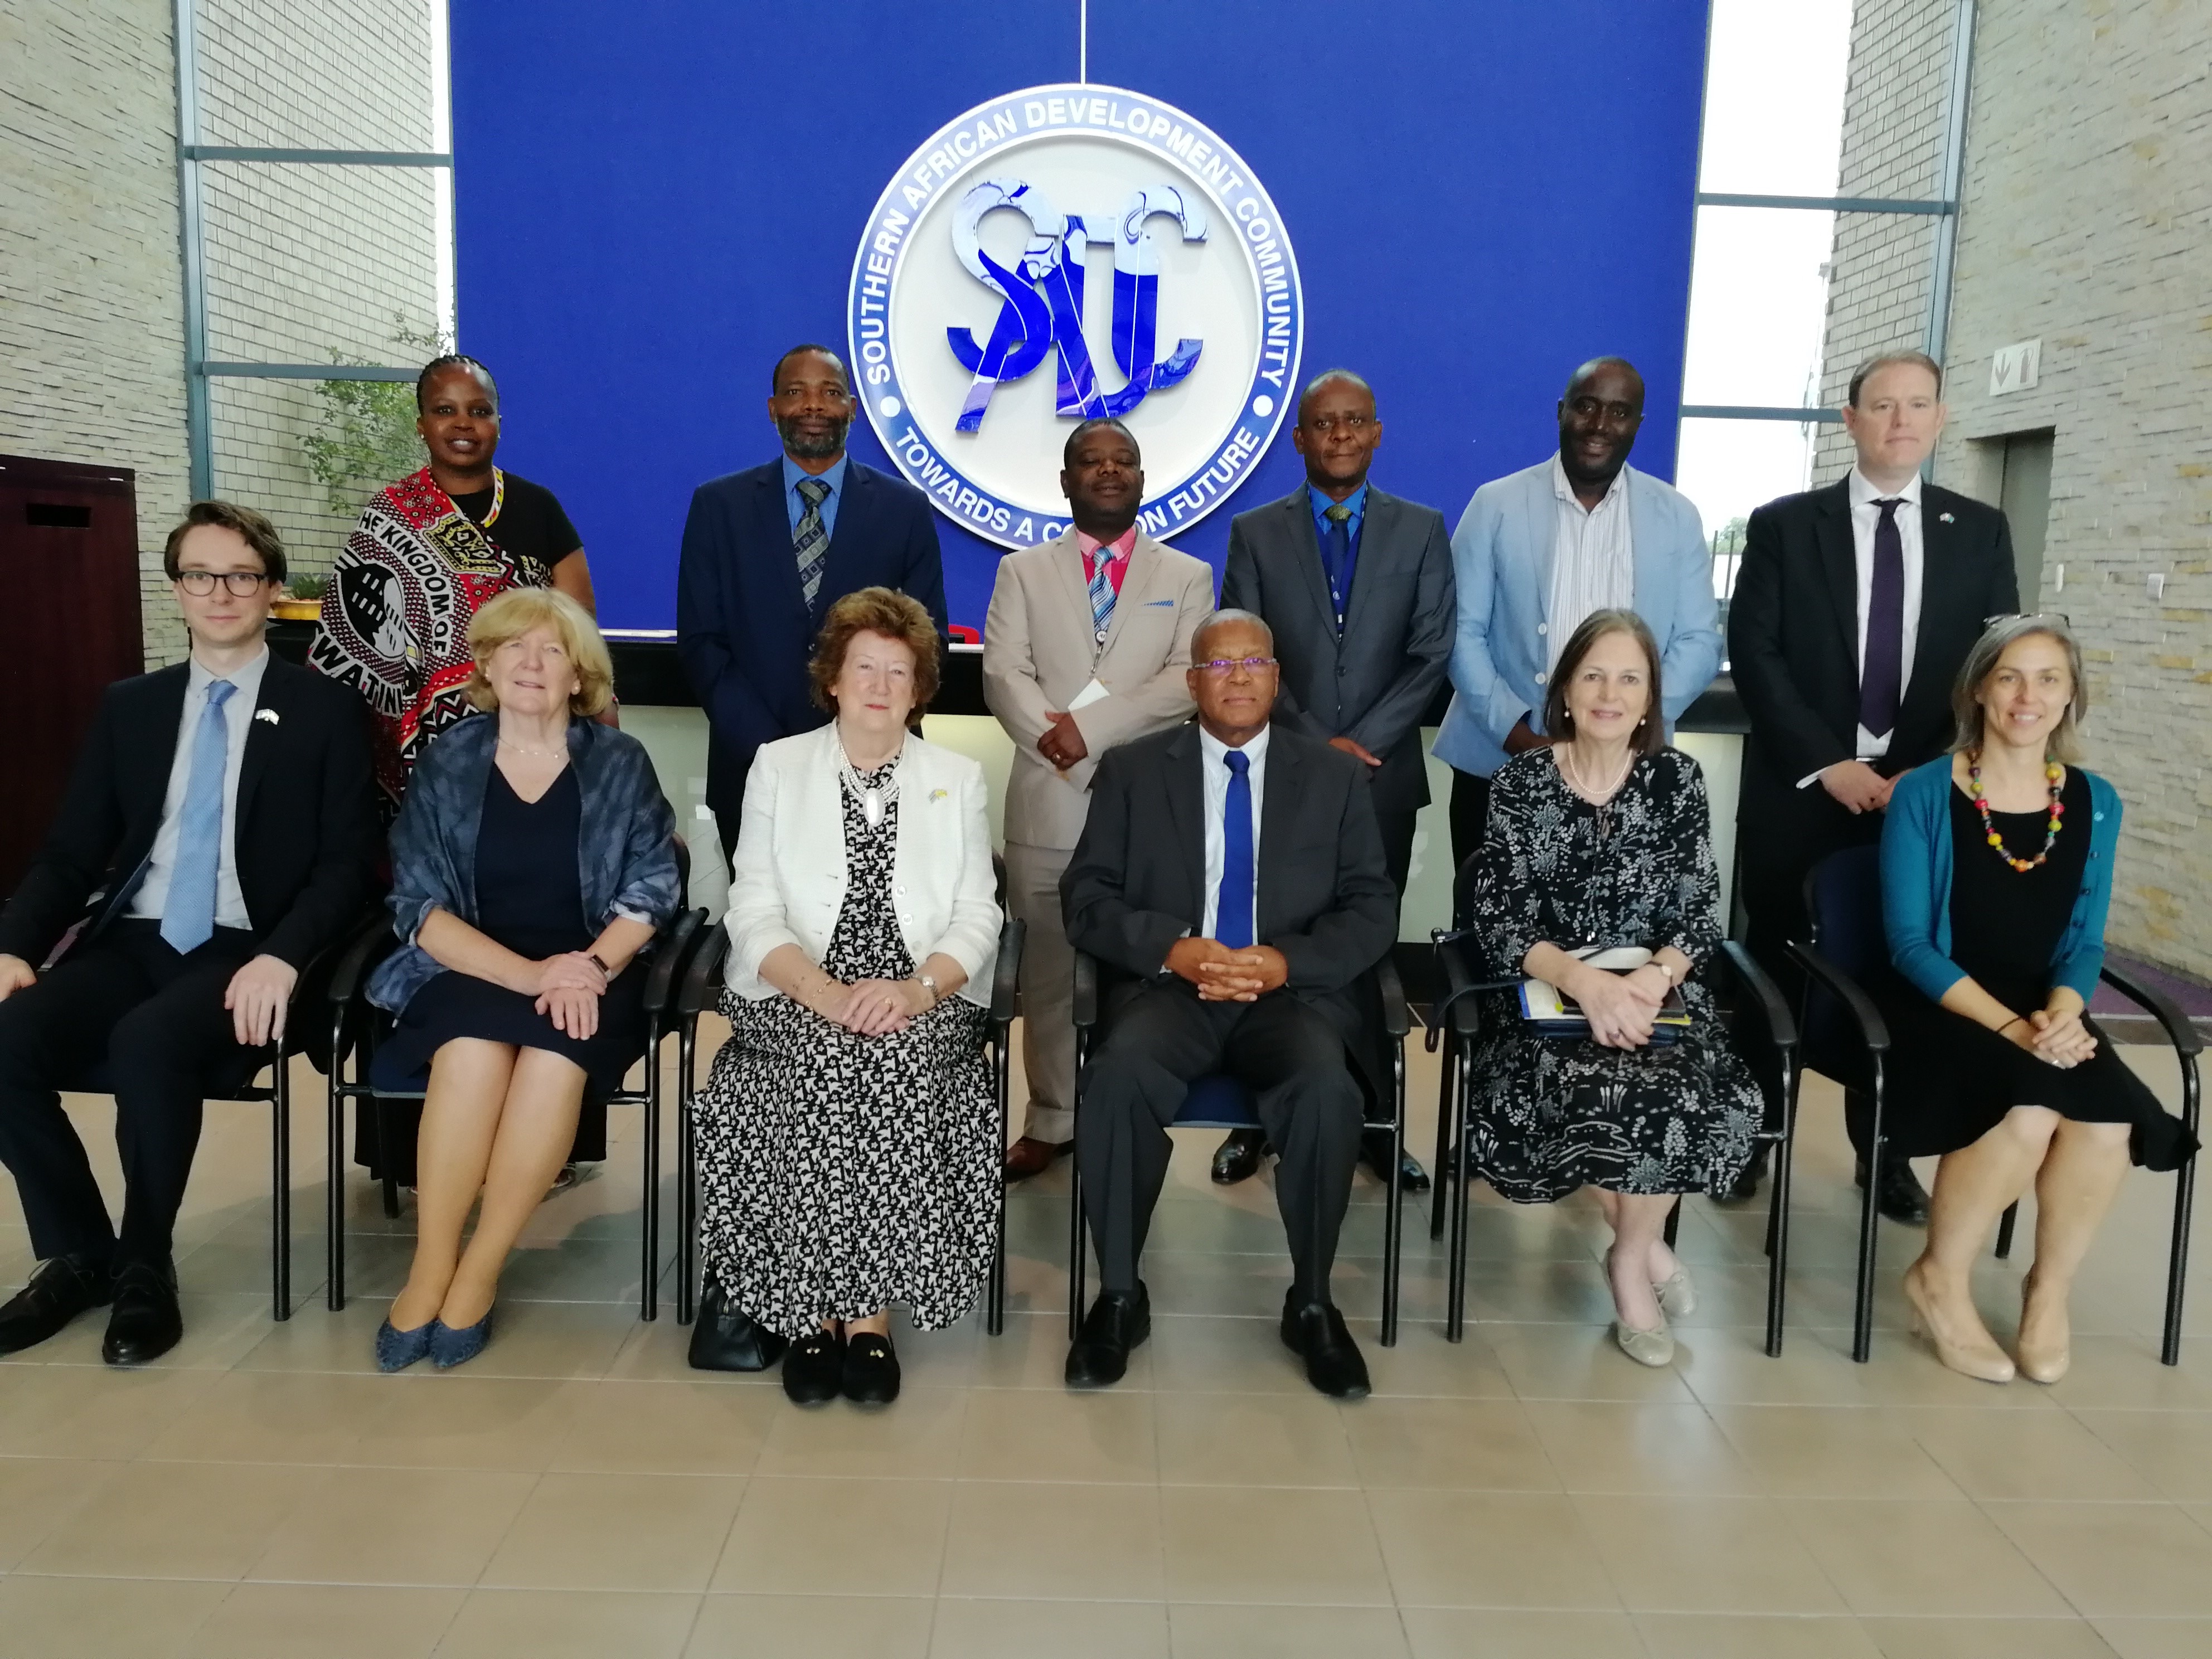 The delegation met with SADC to discuss the regional approach to integration and development